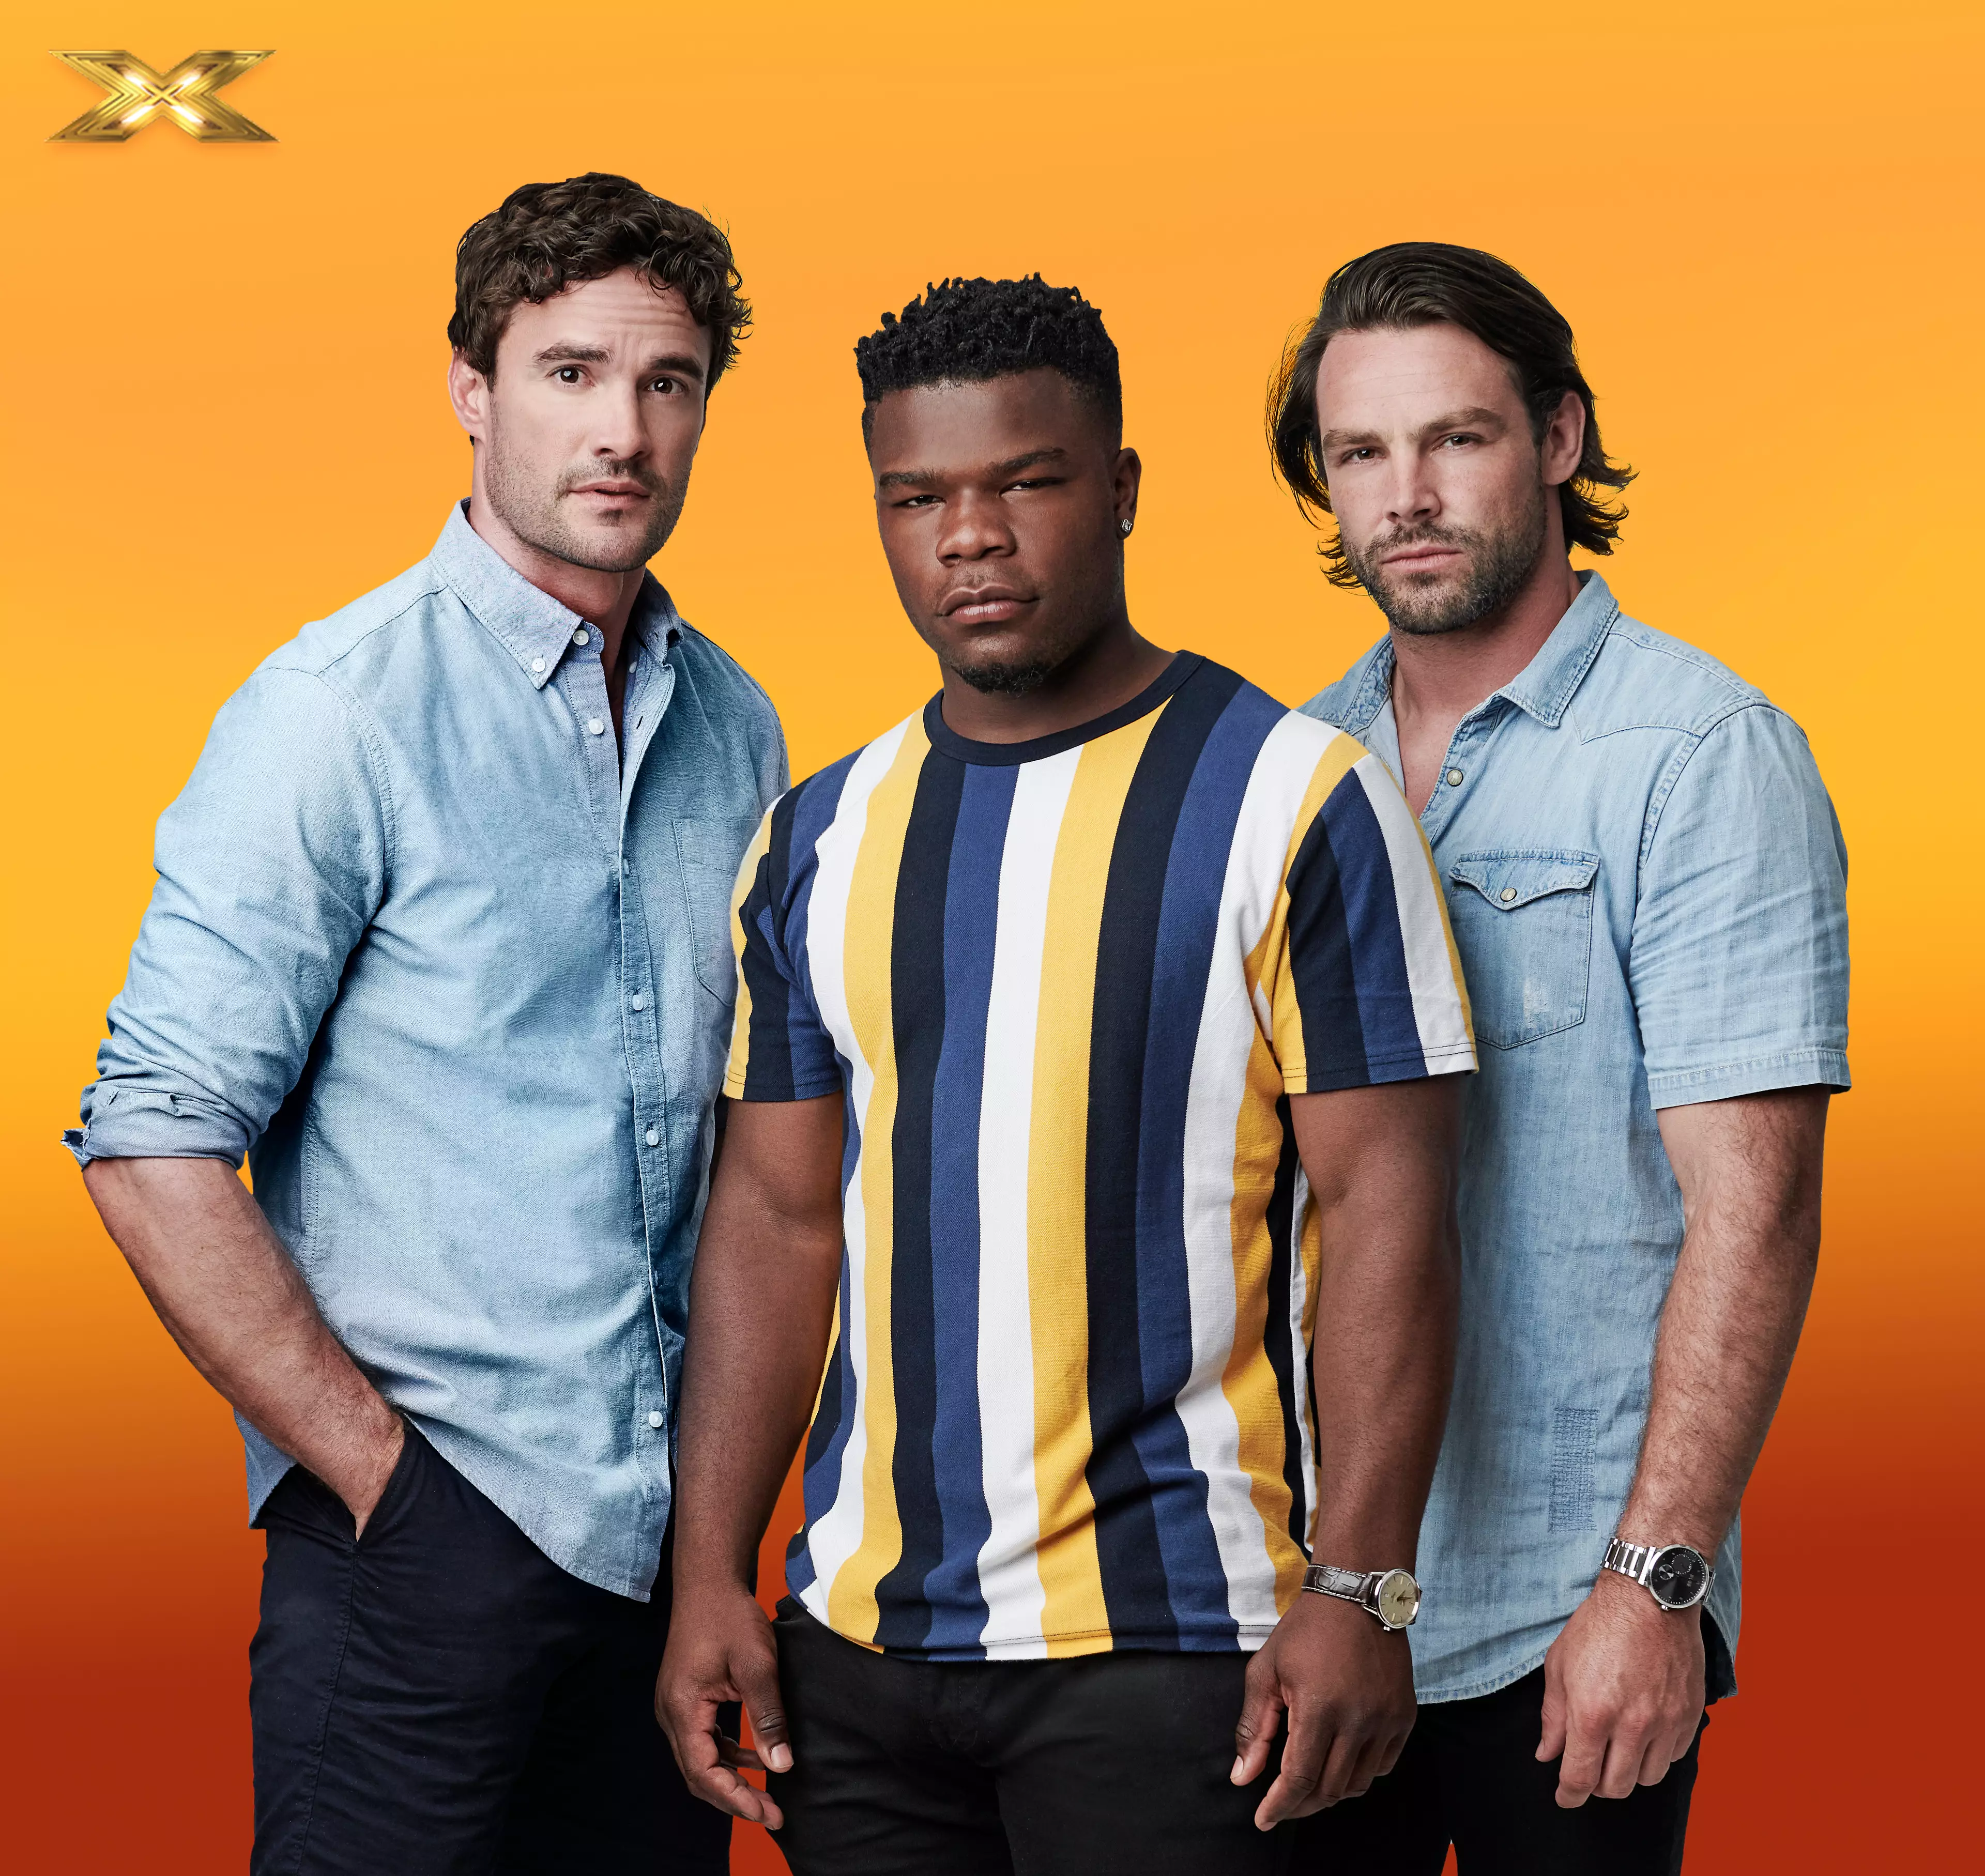 Rugby players Thom Evans, Levi Davis and Ben Foden.